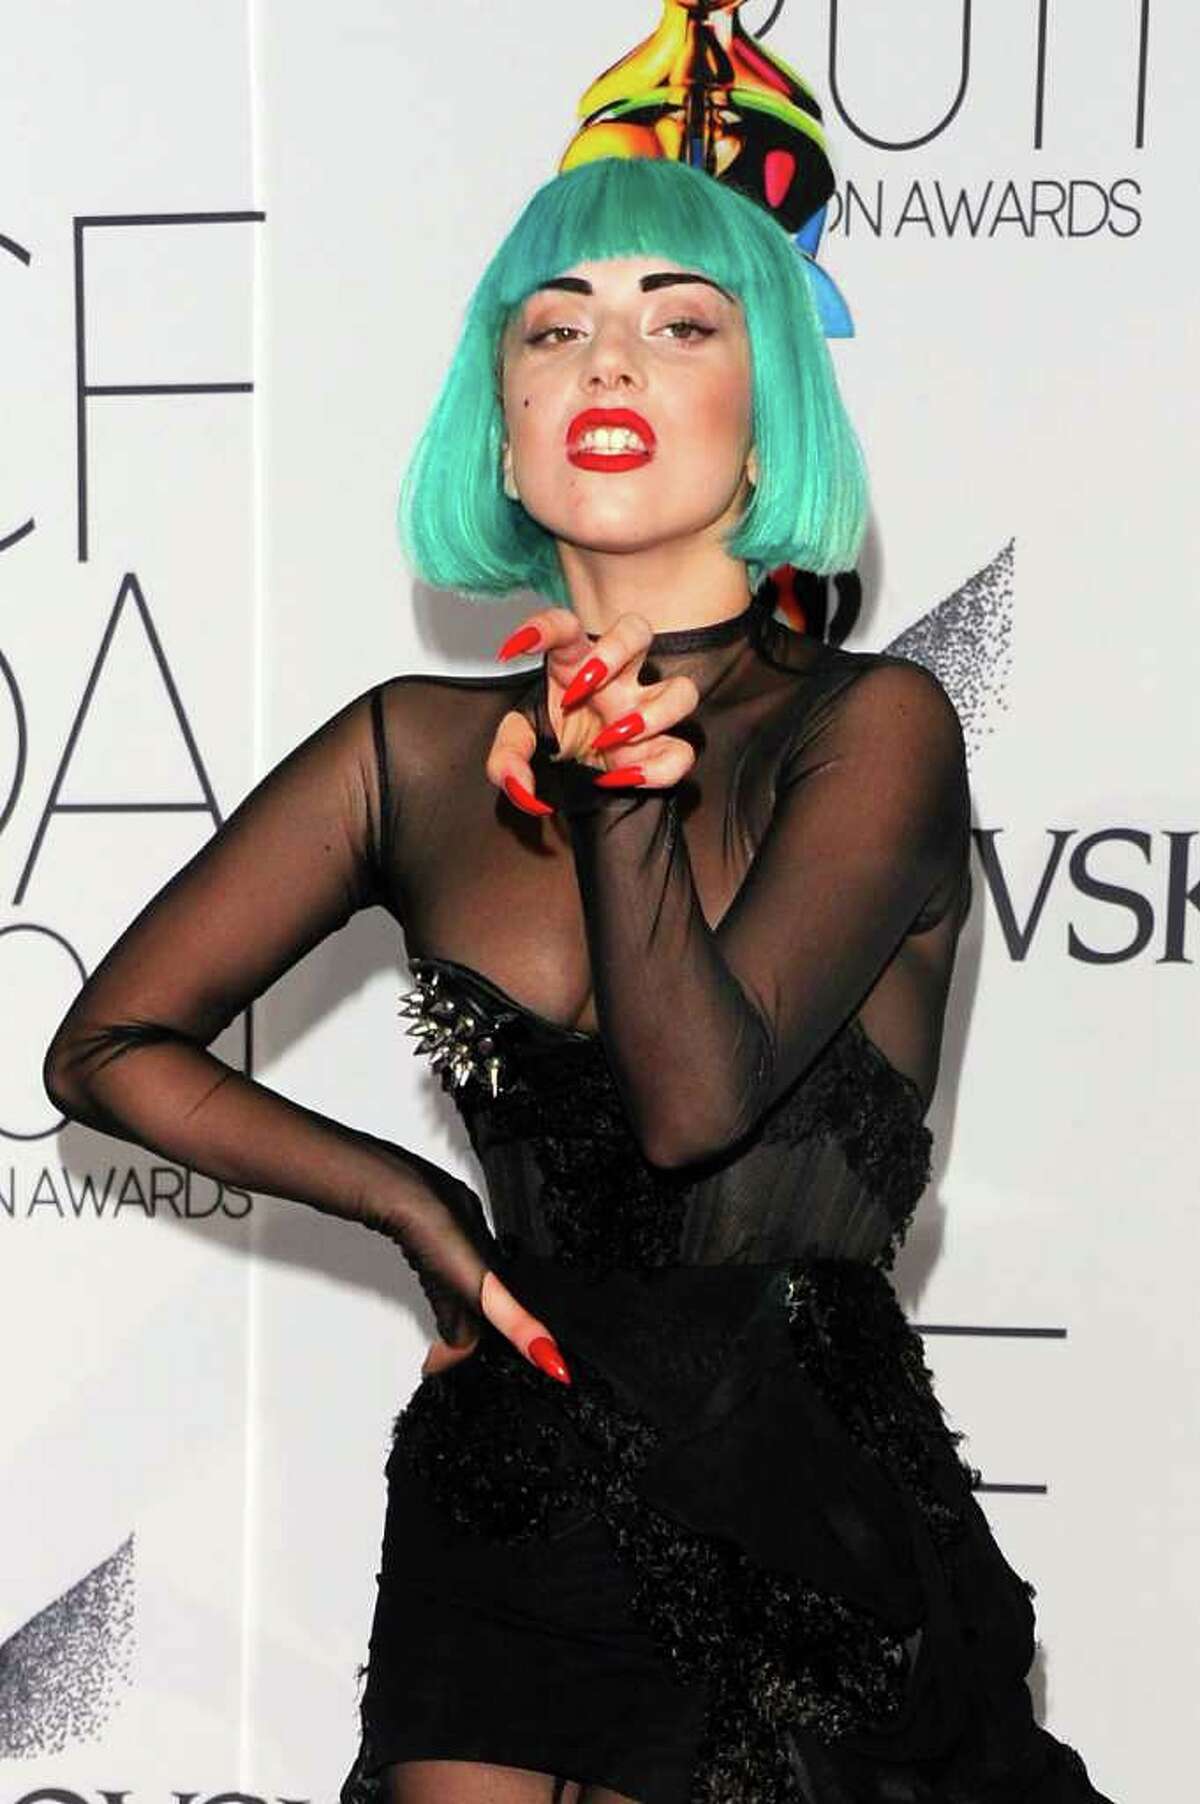 Plenty of fashion and entertainment luminaries strutted at the the 2011 CFDA Fashion Awards on Monday, June 6, 2011 in New York City. But none made a bigger entrance than singer Lady Gaga, who barely covered private parts, while protecting them with spikes. Pictures of other attendees follow a few of Gaga, who won a Fashion Icon Award.